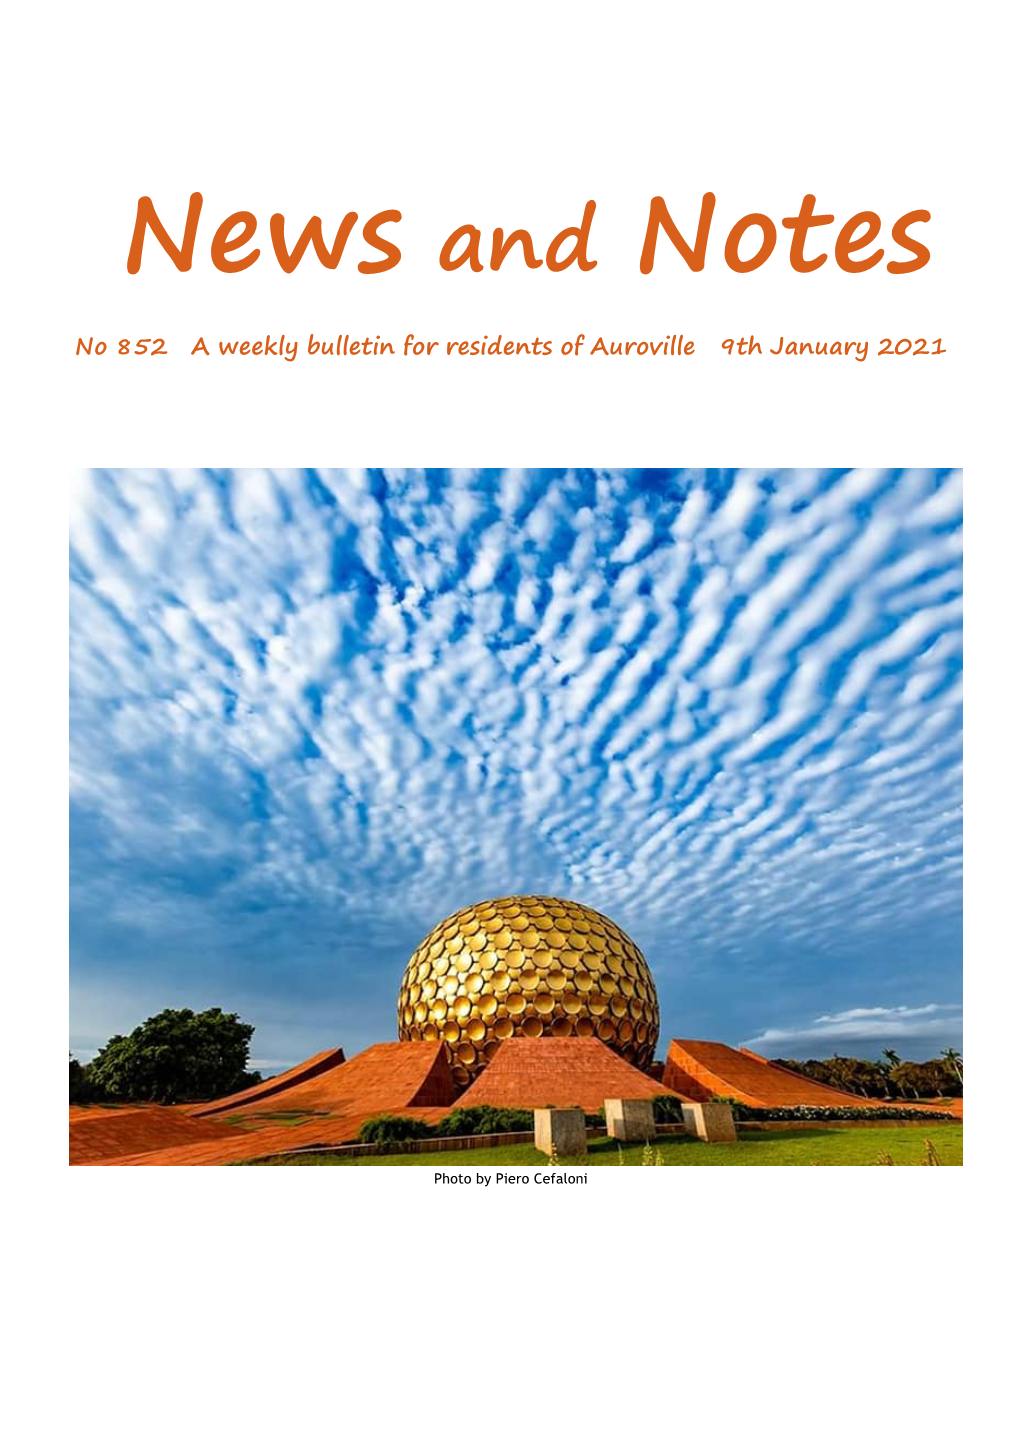 News and Notes No 852 a Weekly Bulletin for Residents of Auroville 9Th January 2021